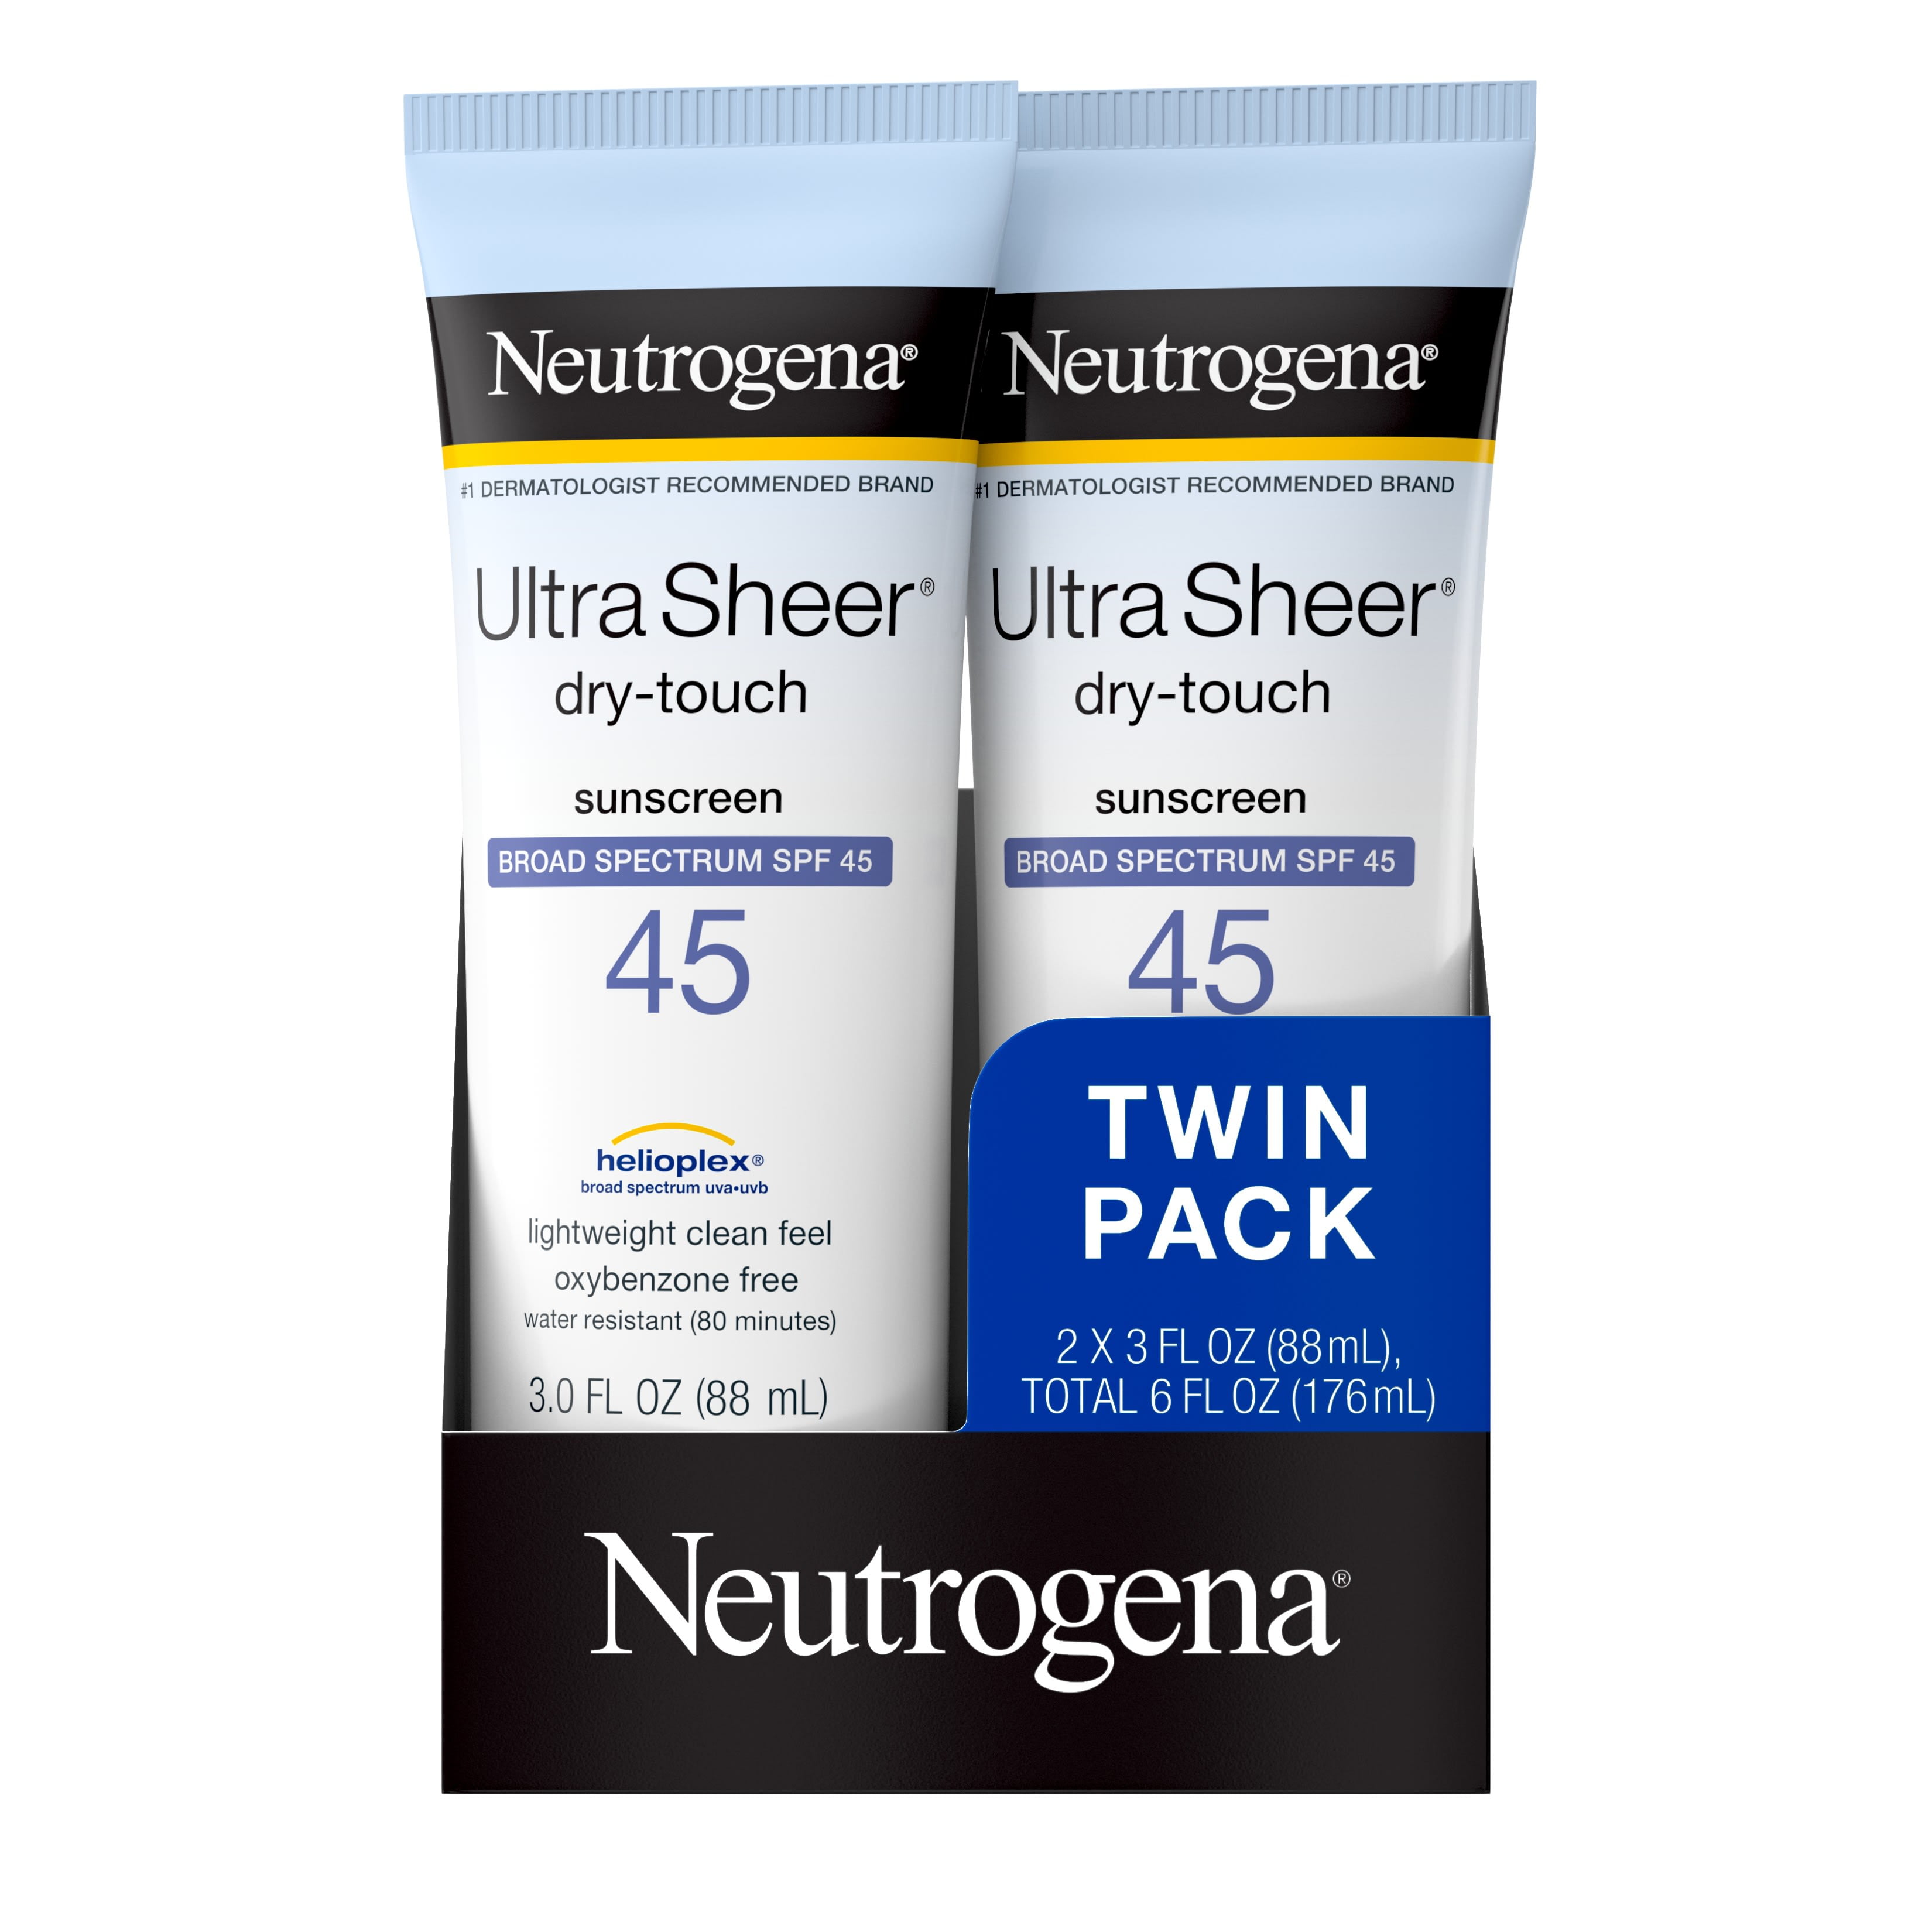 Neutrogena Ultra Sheer Dry-Touch Water Resistant Sunscreen SPF 45, 3 fl. oz, Pack of 2